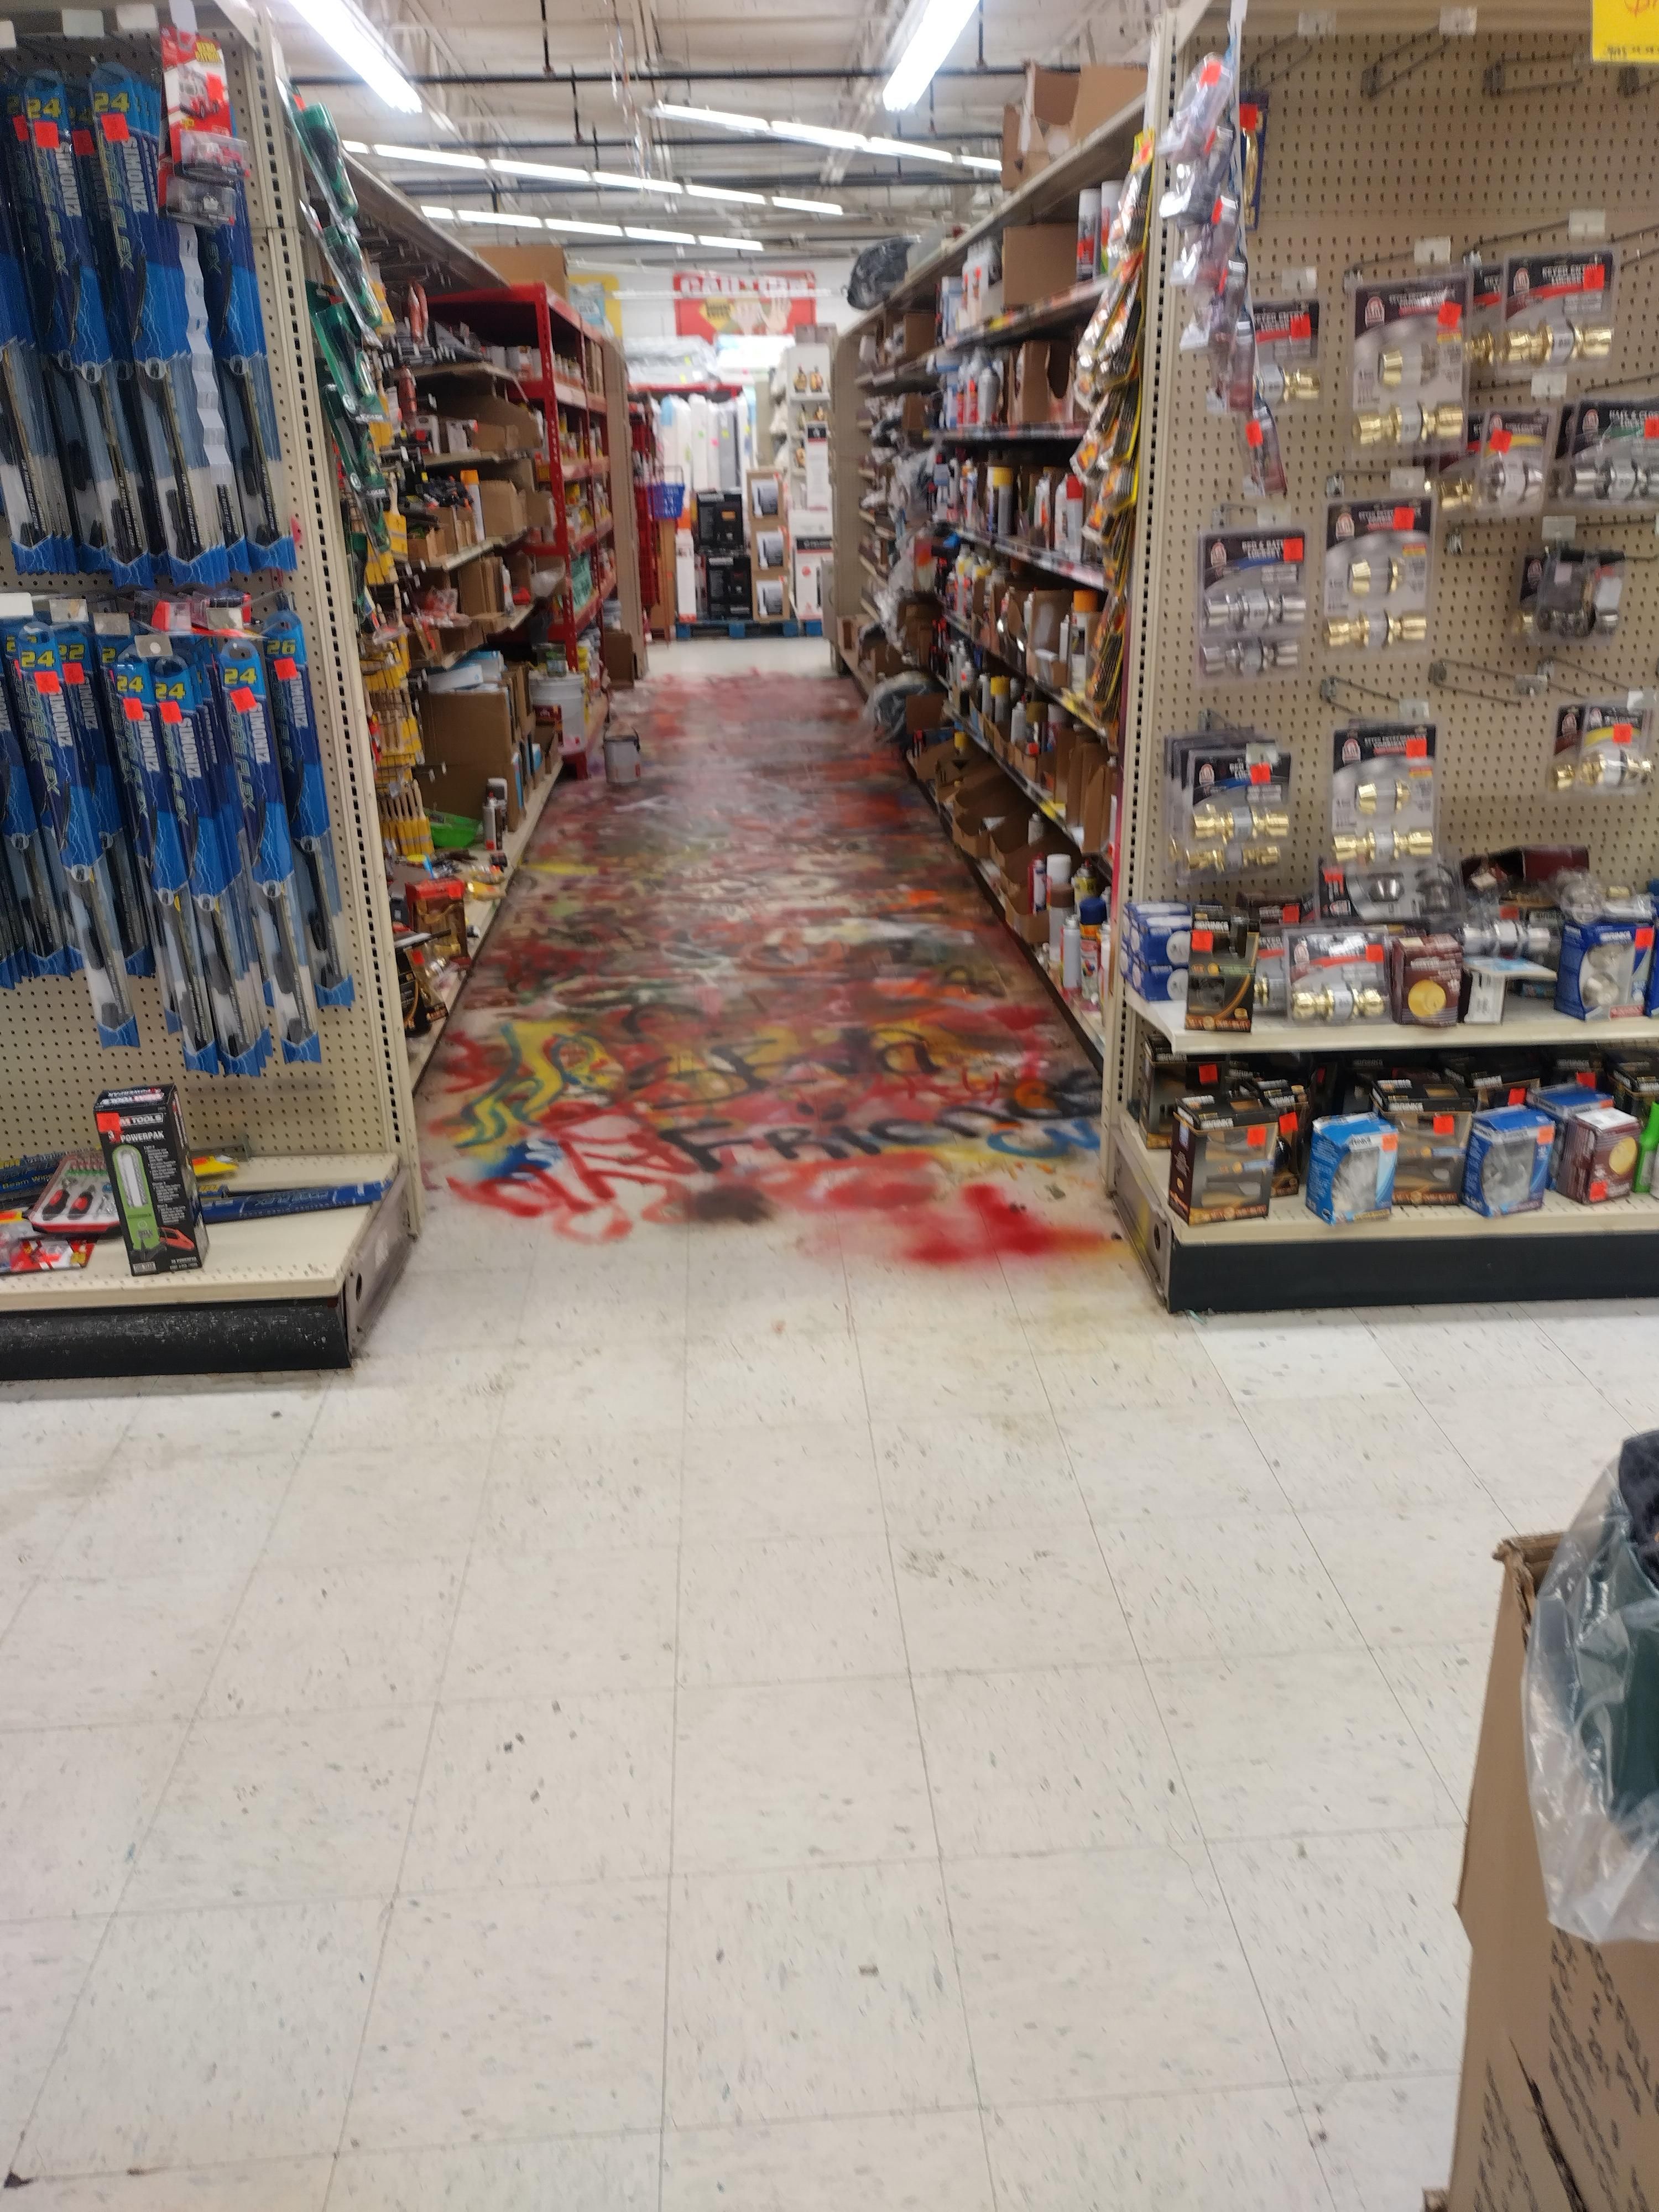 The spray paint aisle at the Ollie's store